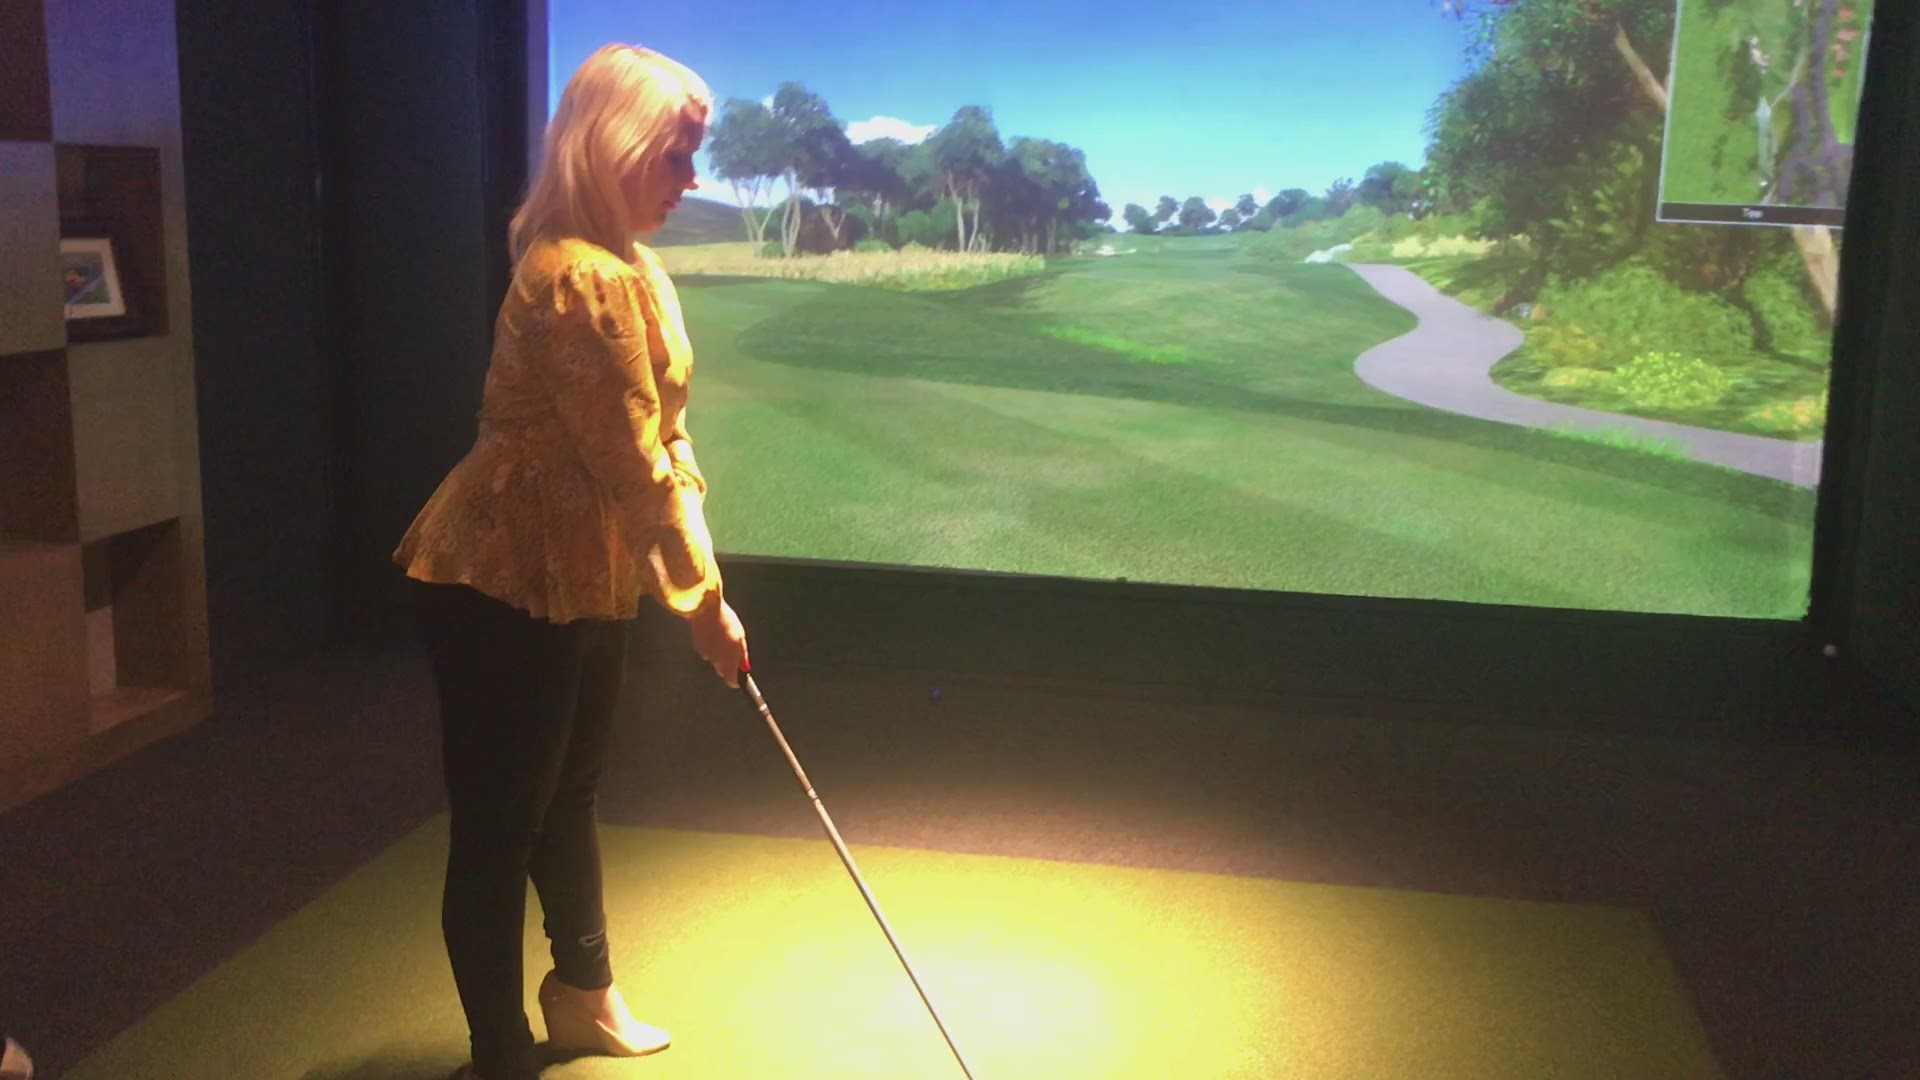 The interactive golf game lets you hit a golf ball at a virtual screen